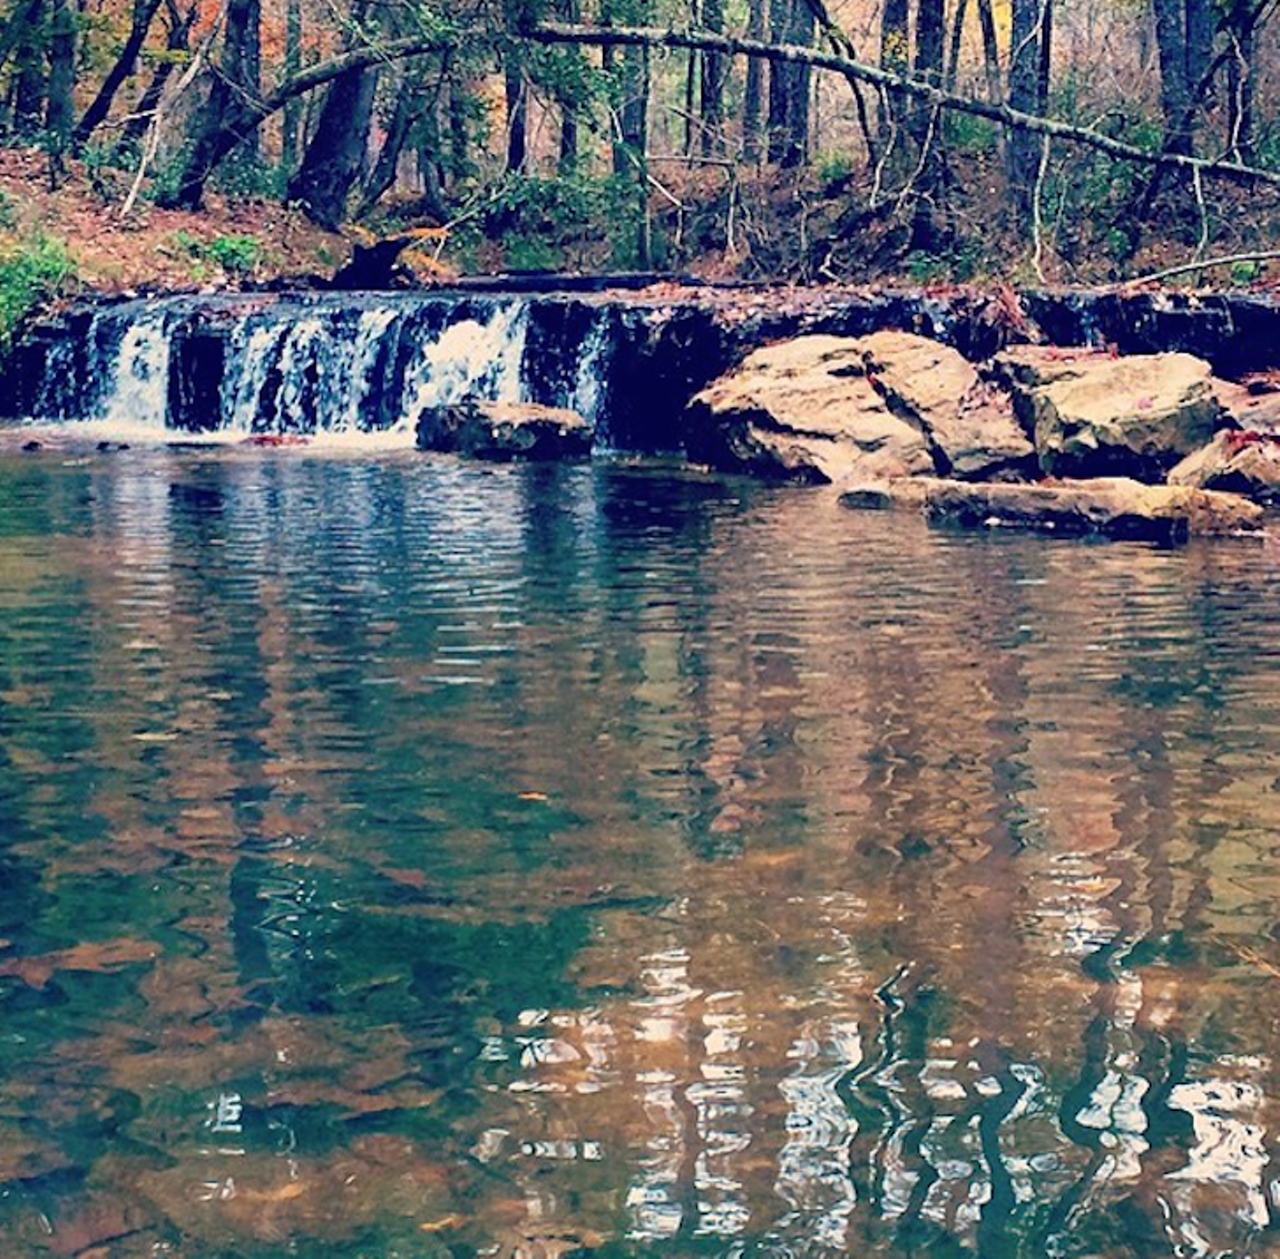 Boykin Springs in Angelina National Forest   
111 Walnut Ridge Road, Zavalla, Texas 75980, (936) 897-1068, fs.usda.gove
Hike the Sawmill Trail winding through Angelina National Forest to check out the park's waterfall as well as the ruins of the Aldridge Sawmill.
Photo via Instagram (instagramtexas)